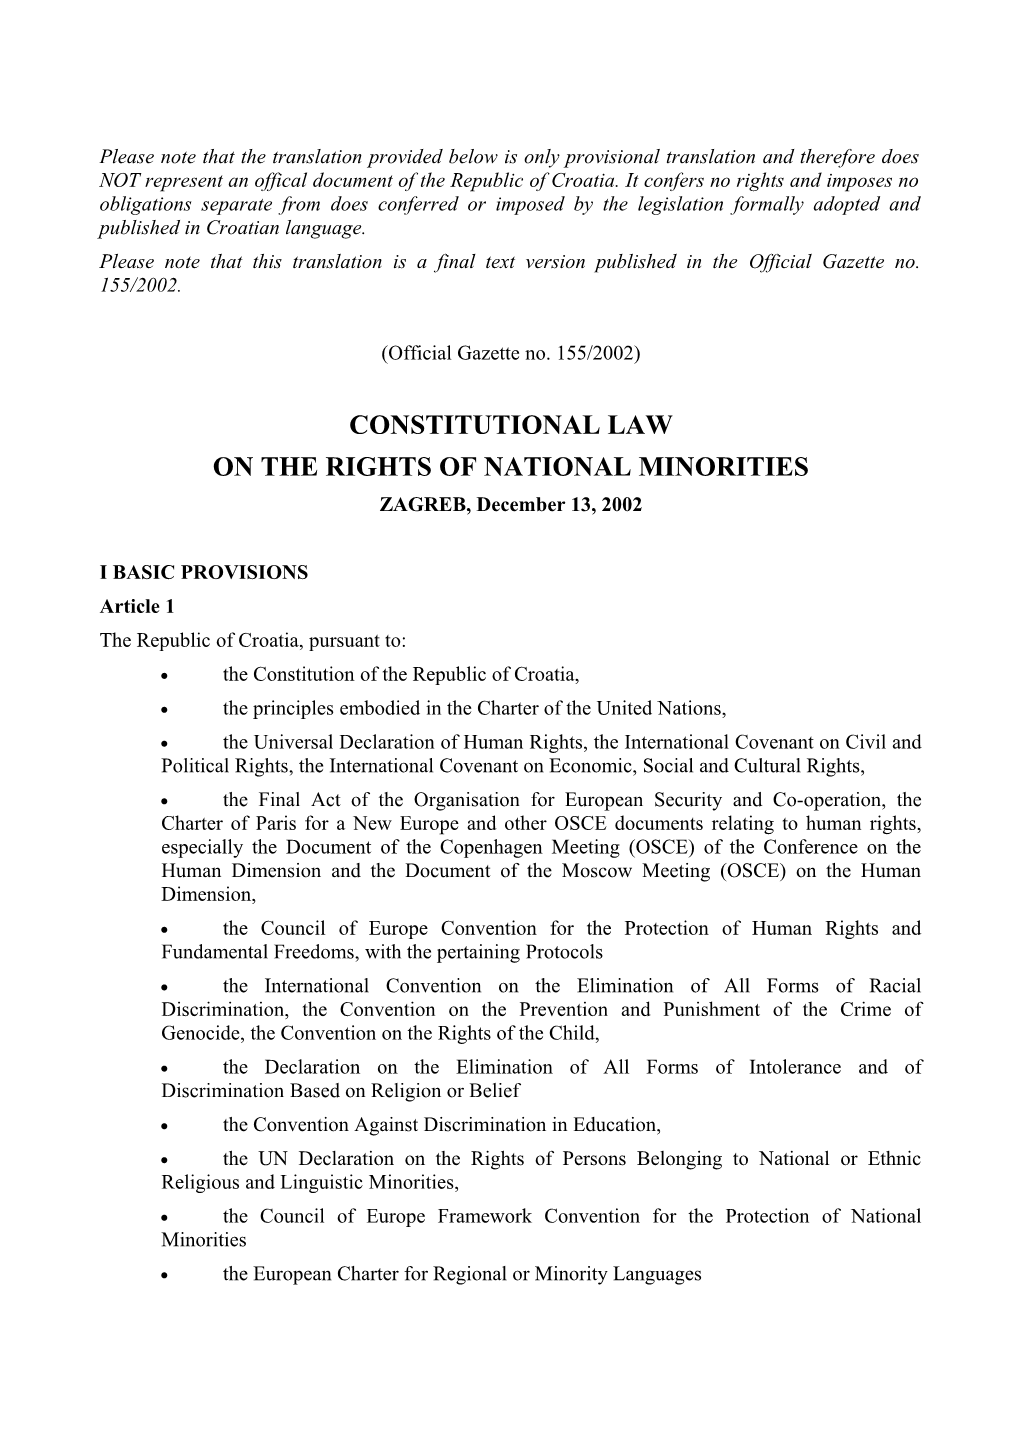 Constitutional Law on the Rights of Minorities